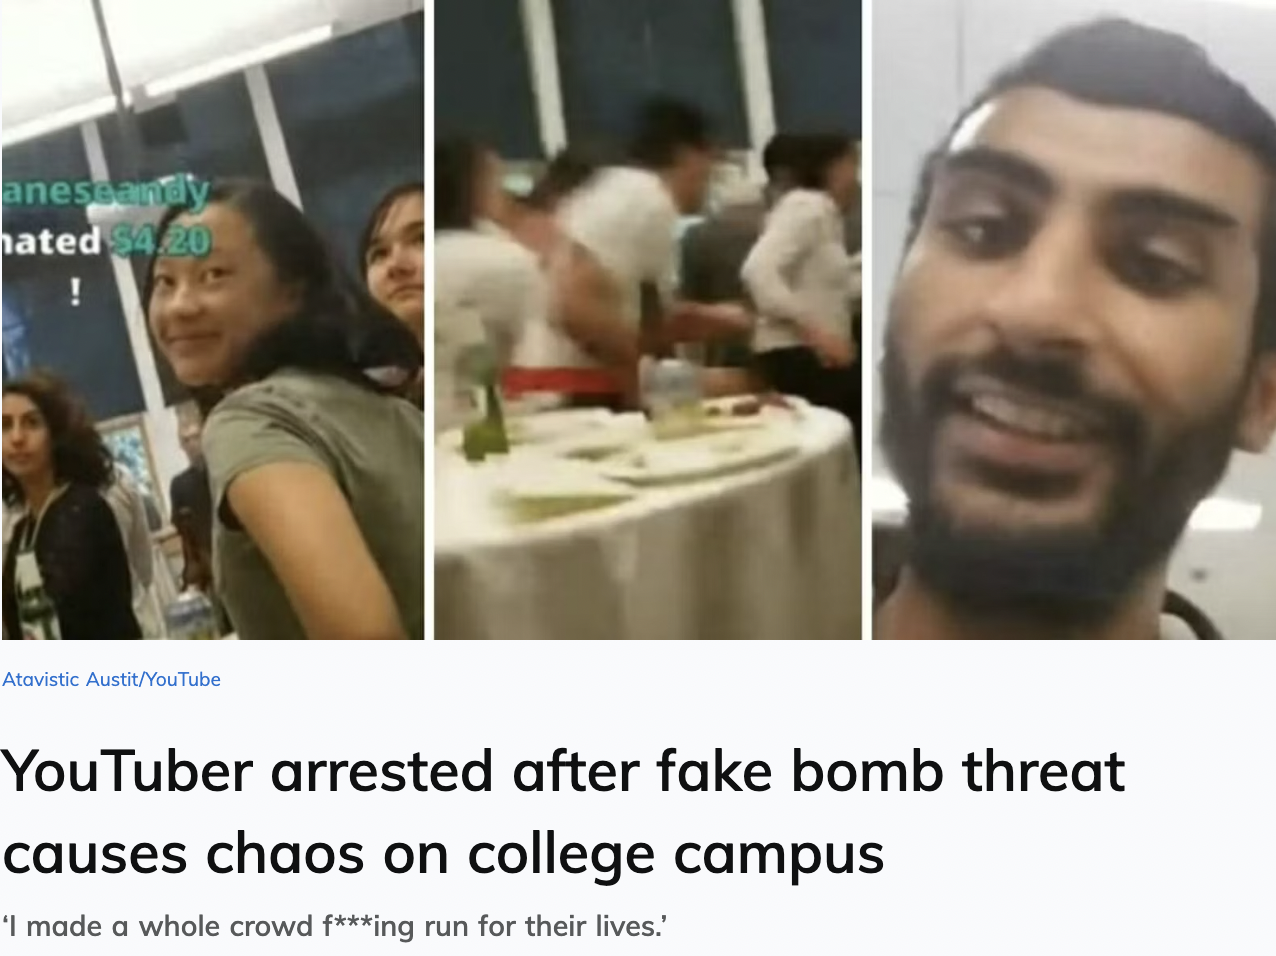 photo caption - anessandy nated $4.20 ! Atavistic AustitYouTube YouTuber arrested after fake bomb threat causes chaos on college campus 'I made a whole crowd fing run for their lives.'